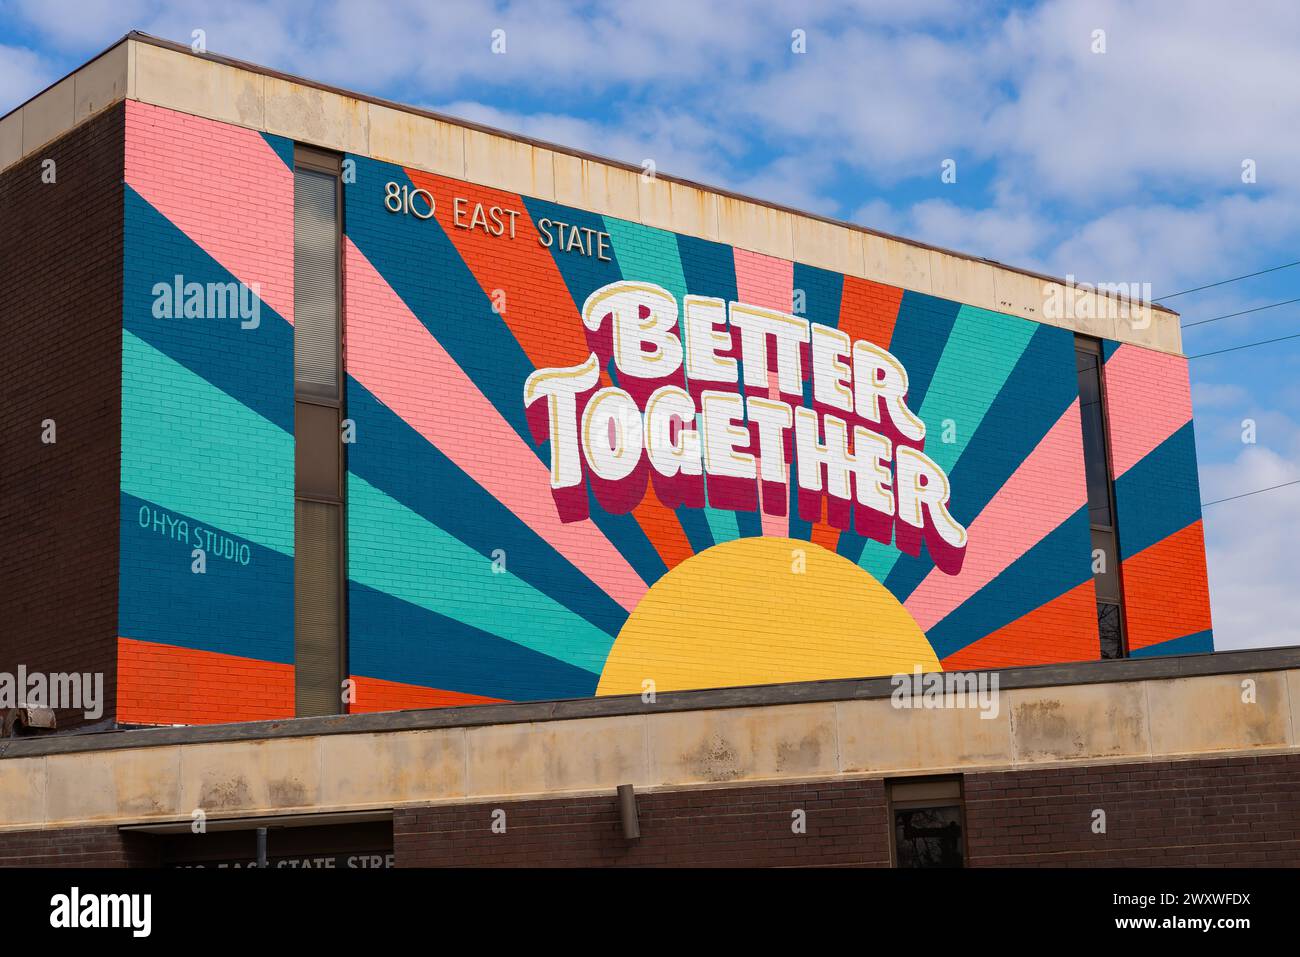 Rockford, Illinois - United States - March 28th, 2024: Downtown mural 'Better Together' by artists OhYa Studio-Ray Mawst and Brian Kehoe, painted in 2 Stock Photo